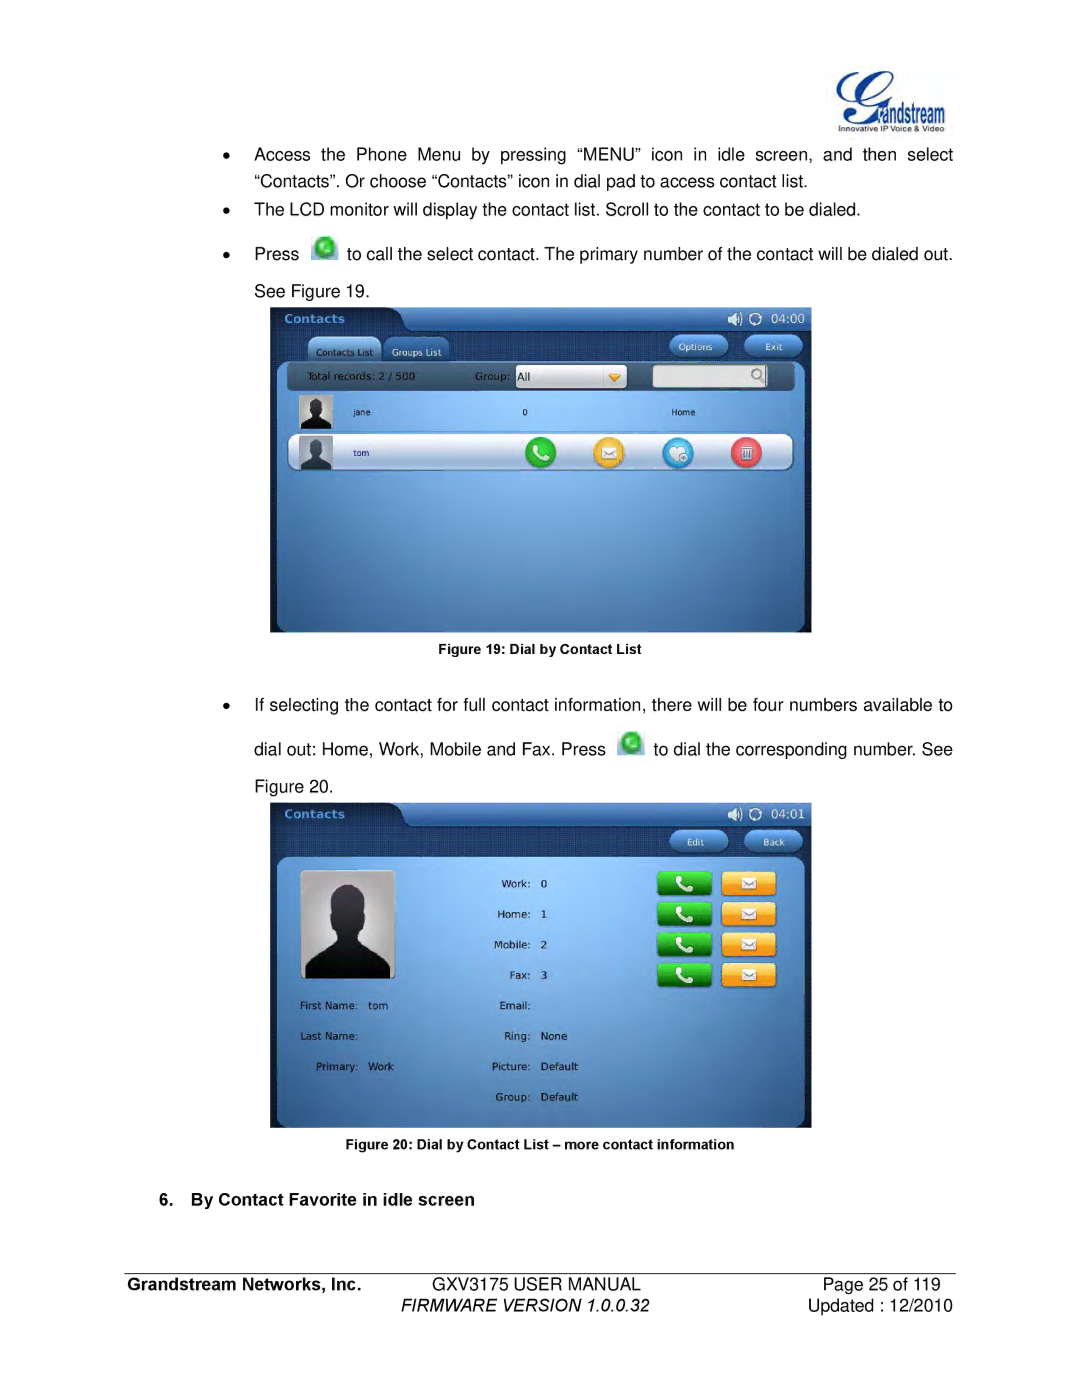 Grandstream Networks GXV3175 manual By Contact Favorite in idle screen Grandstream Networks, Inc 